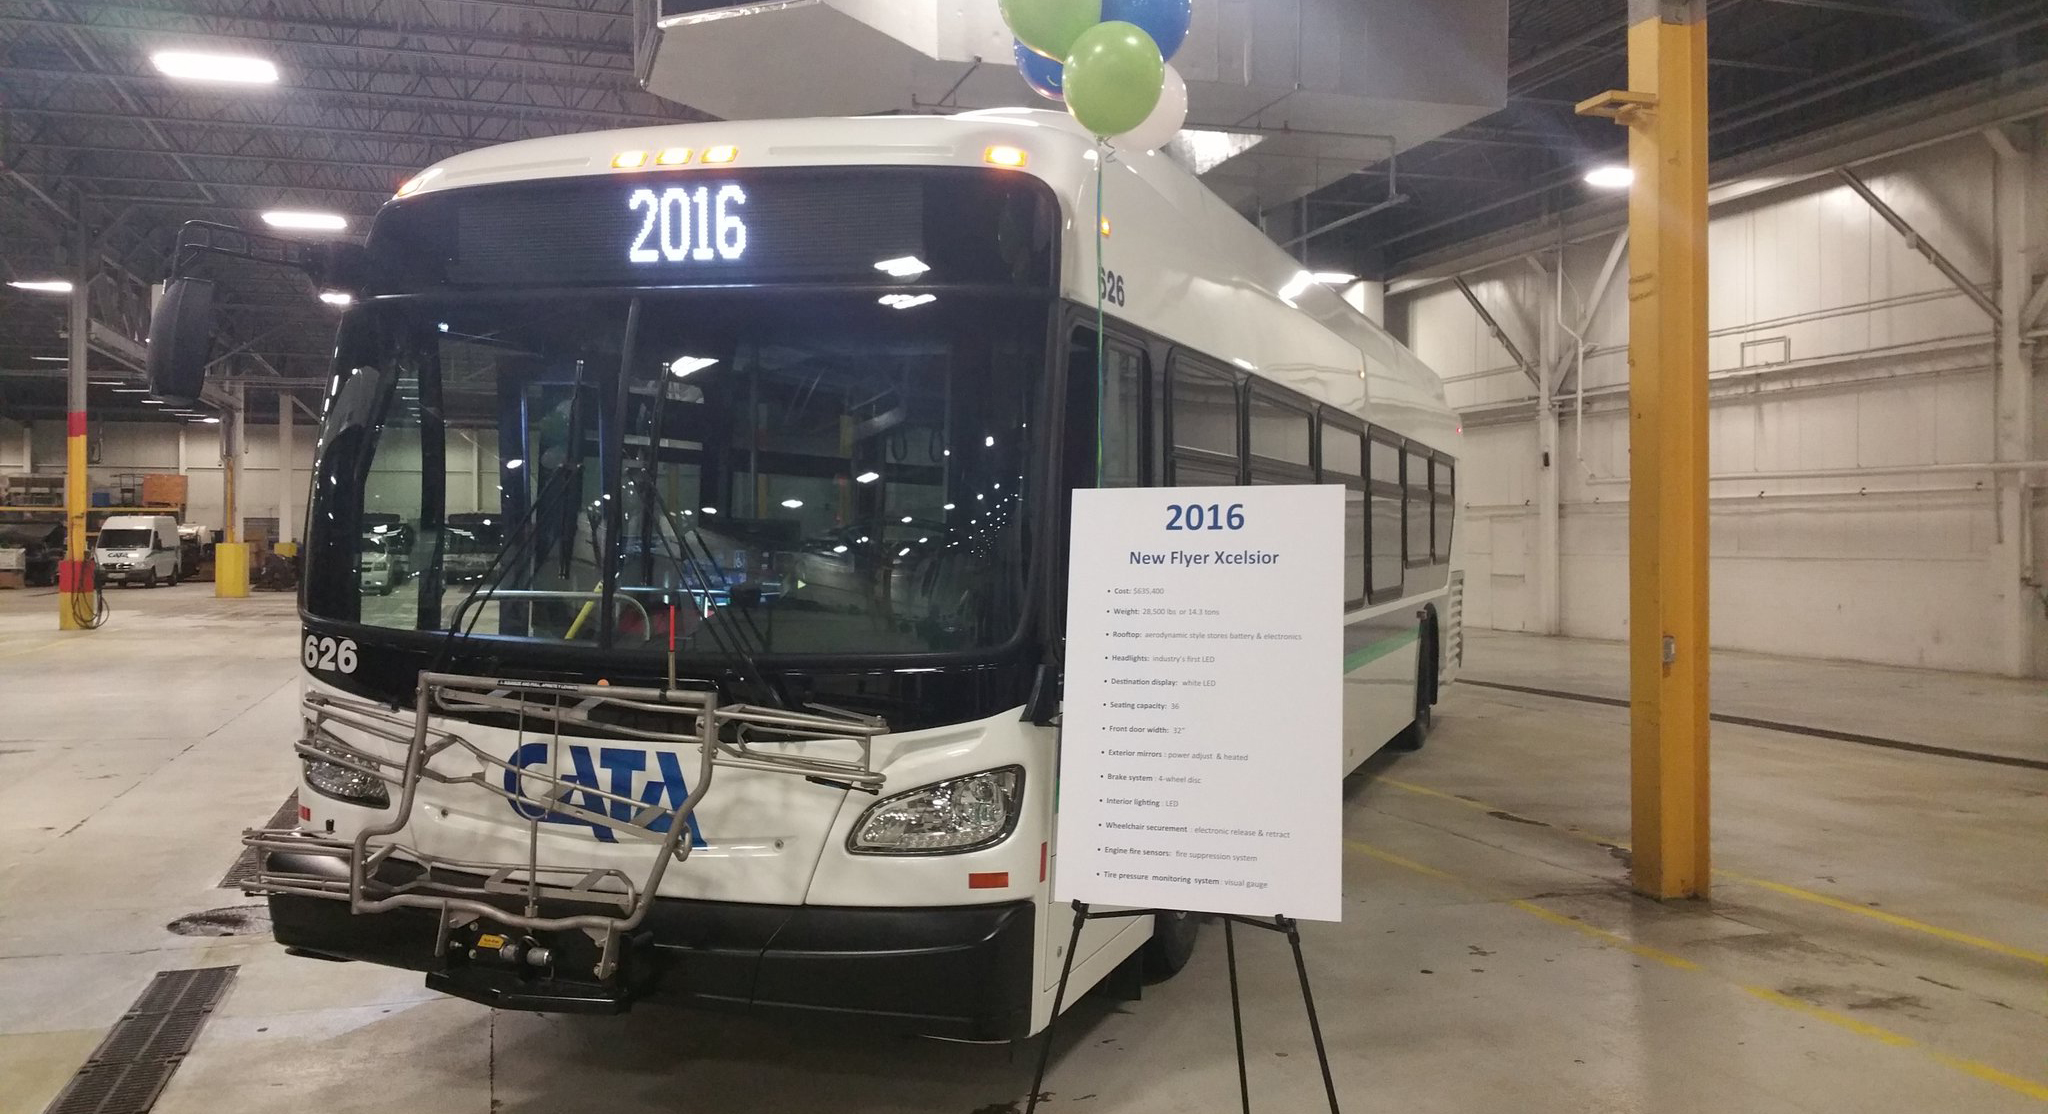 CATA's improved hybrid Xcelsior model pictured at the debut event.